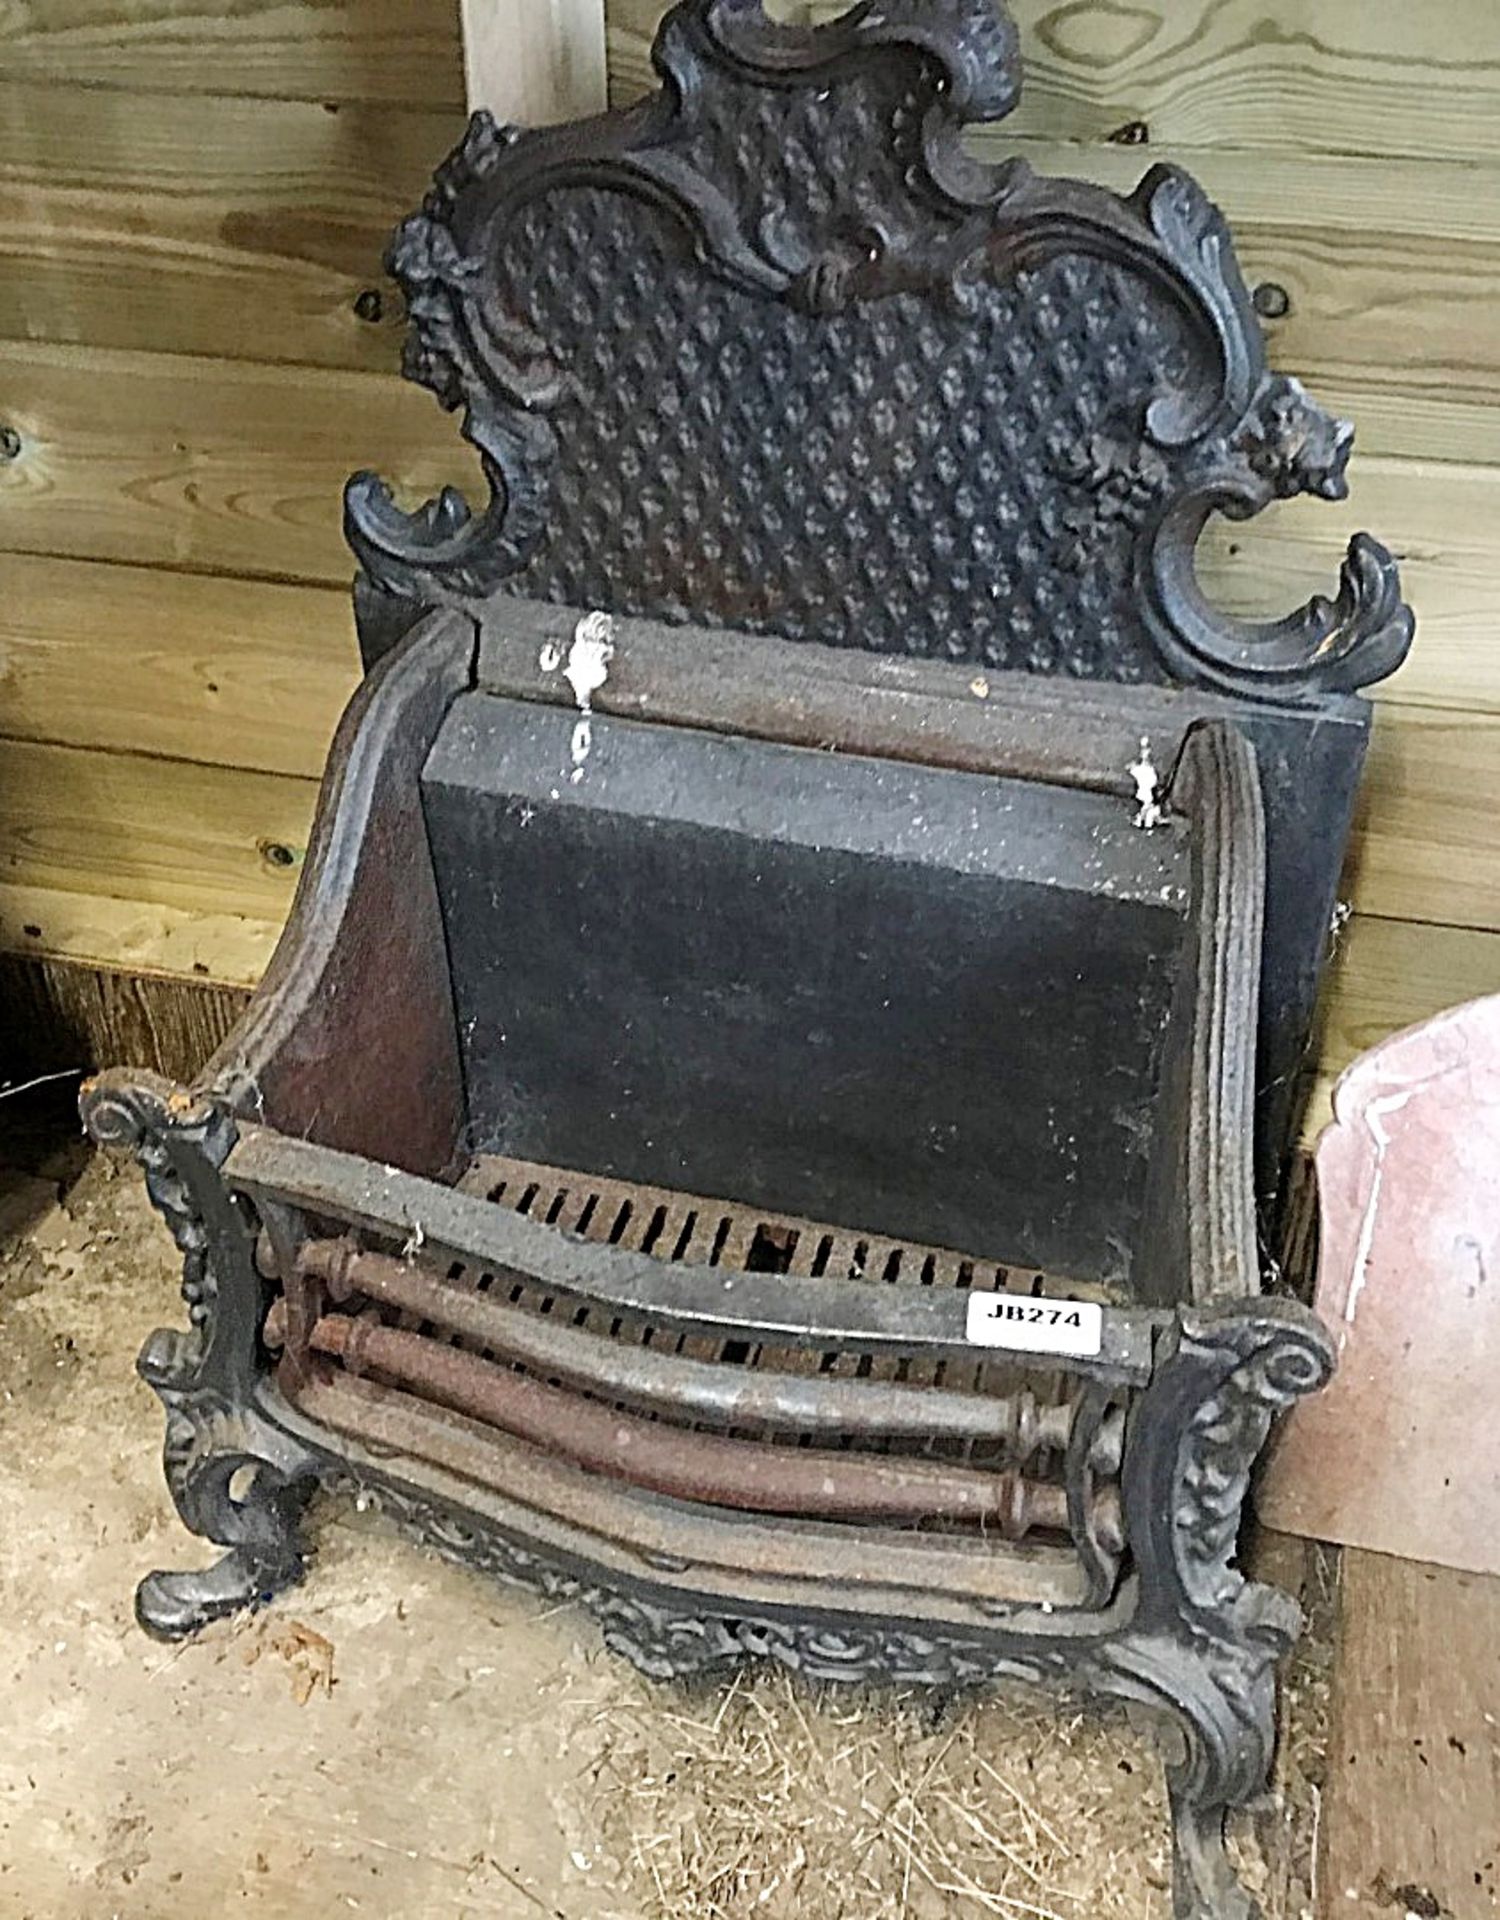 1 x Antique Fire Grate - Dimensions: 57 x 32 x Height 74cm - Ref: 274 (F) - Pre-Owned - NO VAT ON